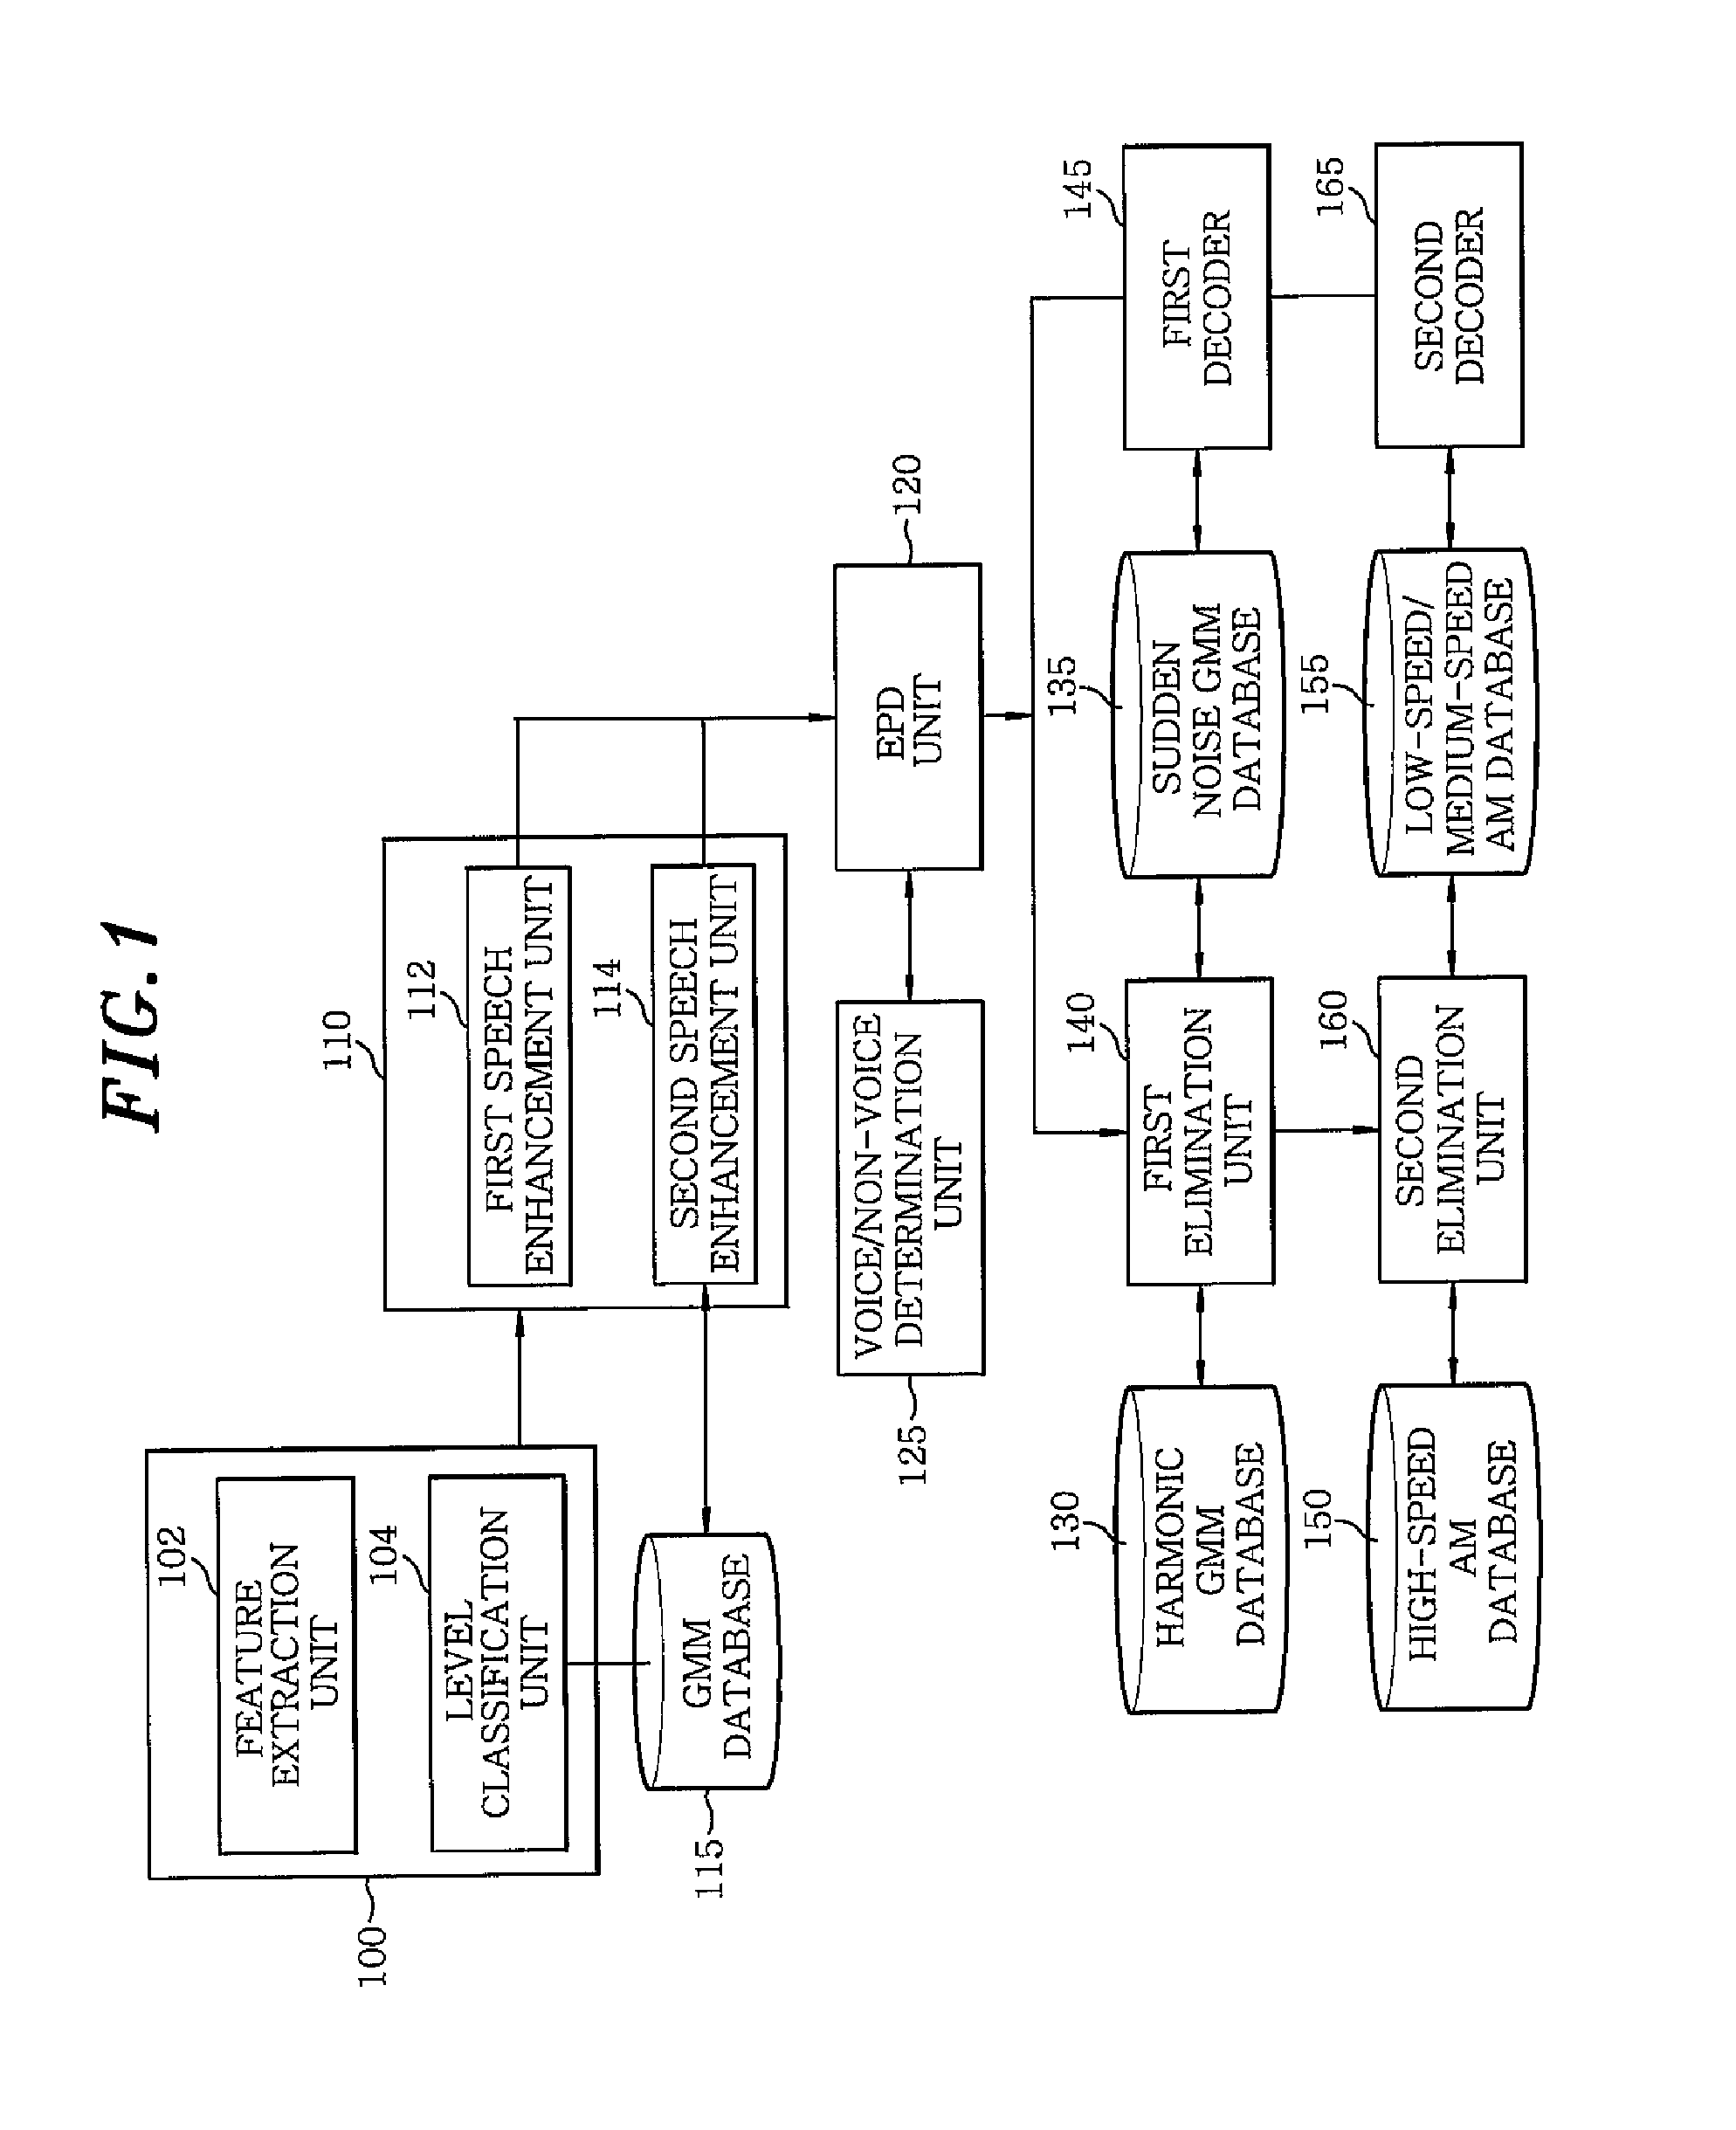 Noise reduction for speech recognition in a moving vehicle